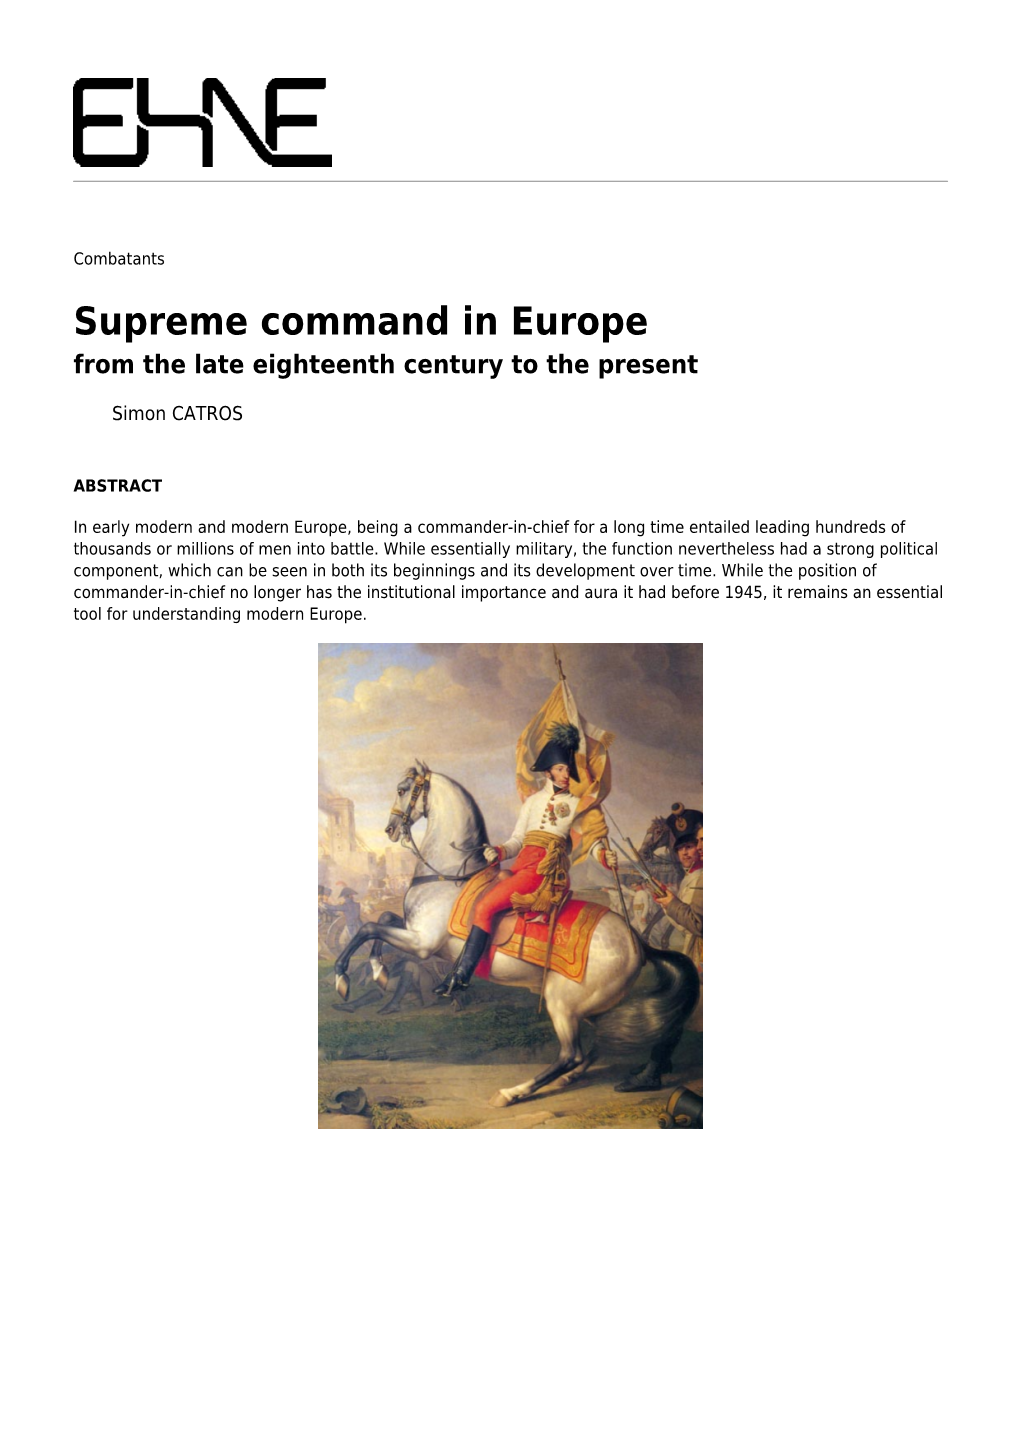 Supreme Command in Europe from the Late Eighteenth Century to the Present